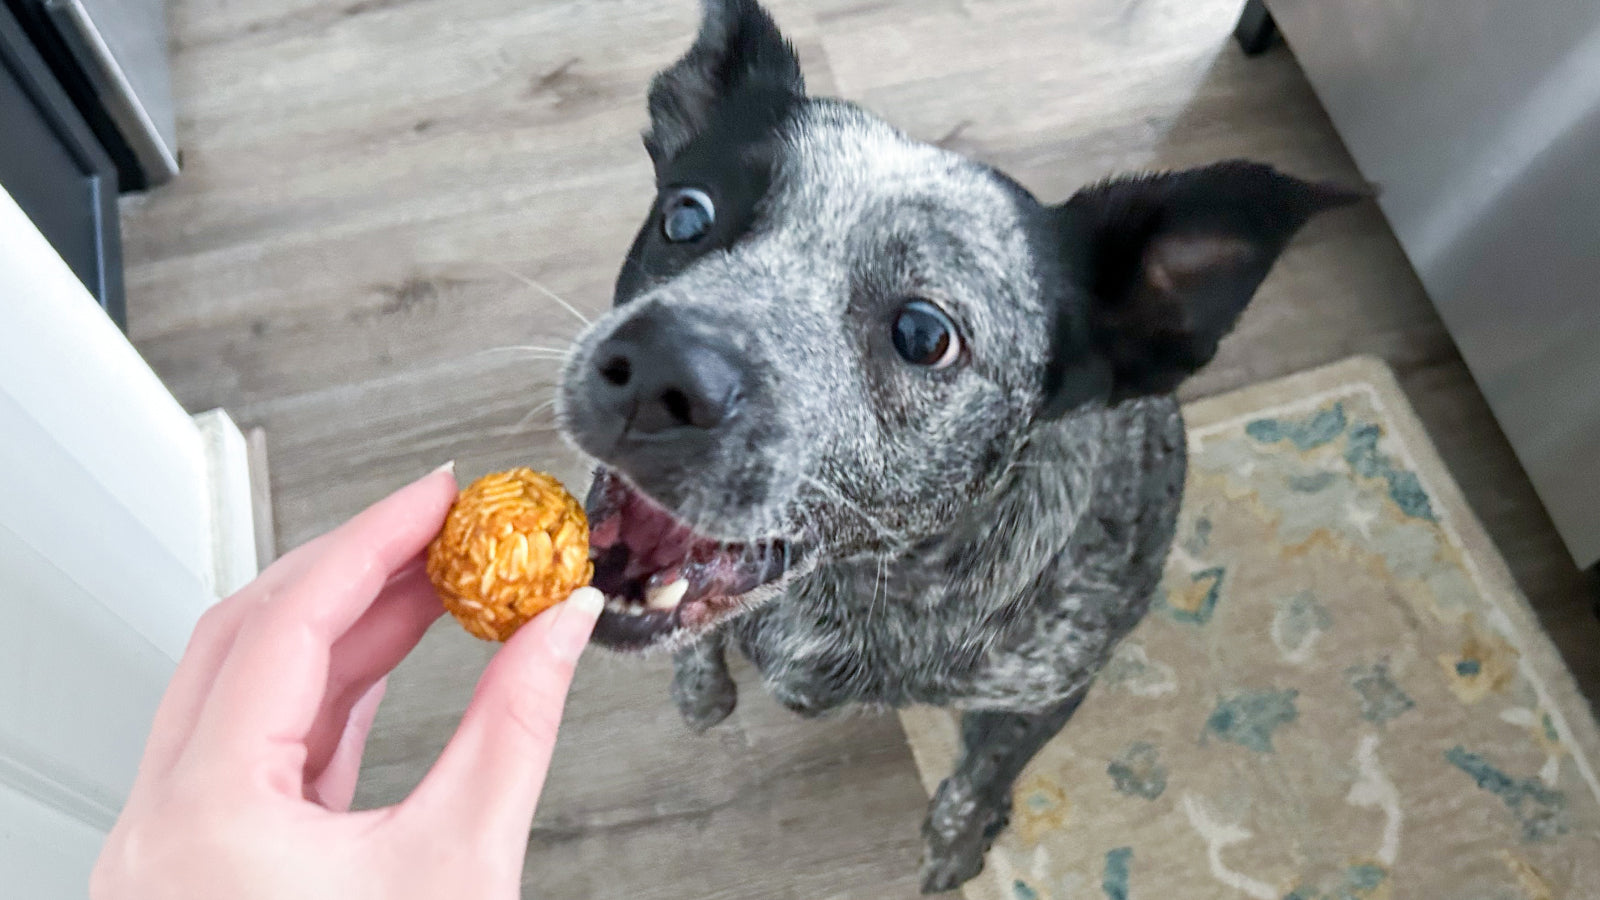 A gray dog with black ears excitedly takes a no bake pumpkin dog treat from a woman's hand